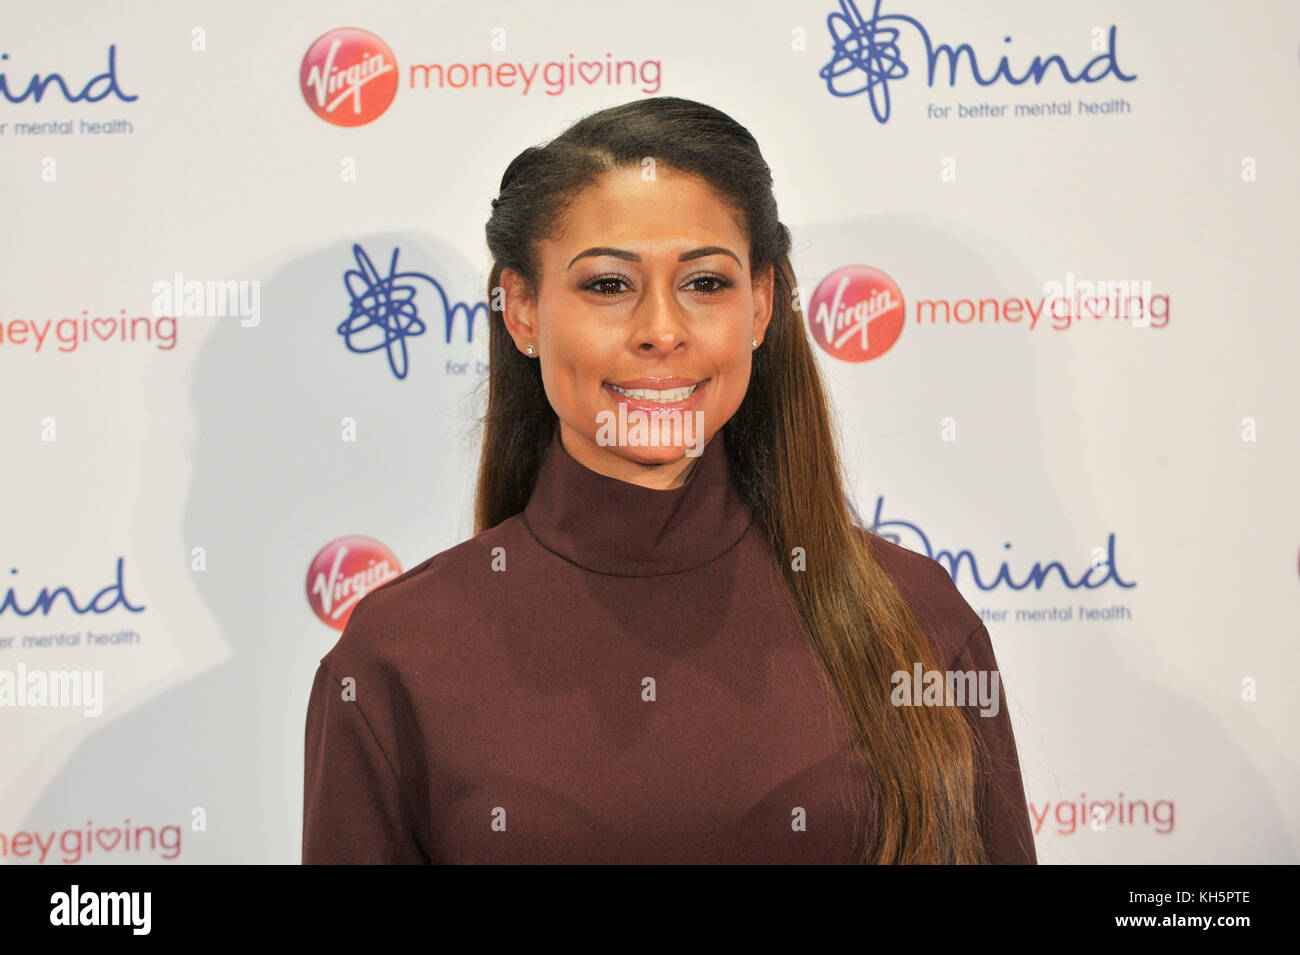 London, UK. 13th Nov, 2017. Rachel Bruno, daughter of ex boxer Frank Bruno, on the red carpet at the Virgin Money Giving Mind Media Awards 2017 at the Odeon Cinema, Leicester Square. The Awards celebrate the best examples of reporting and portrayals of mental health in print, broadcast, digital media and film. Credit: Stephen Chung/Alamy Live News Stock Photo